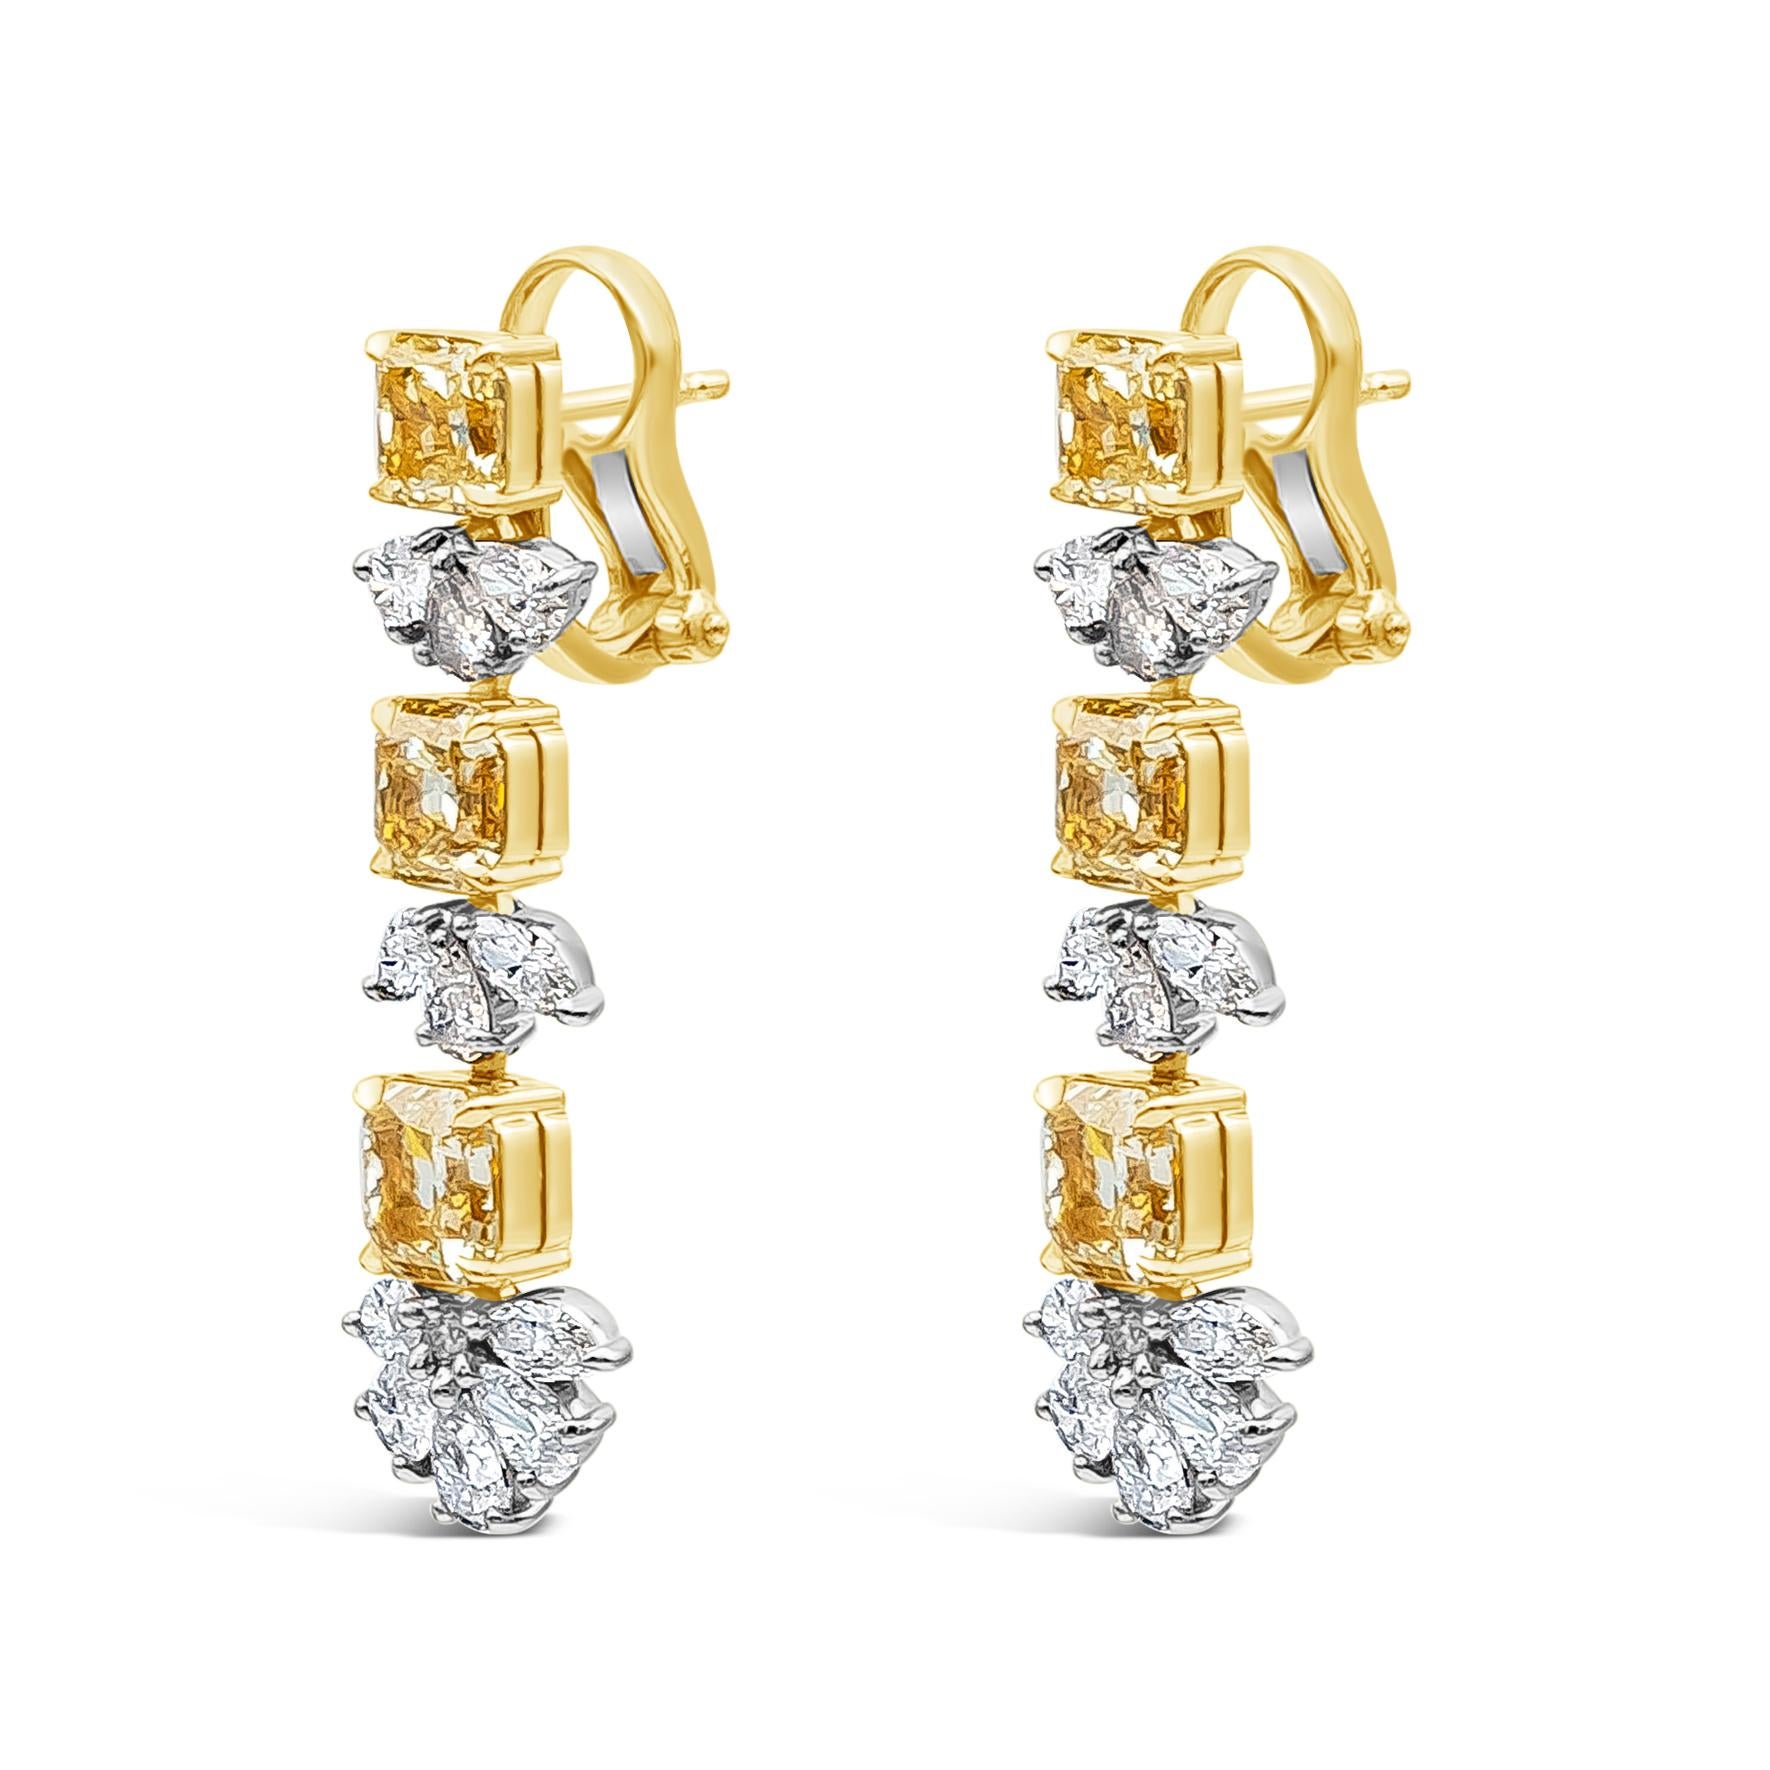 Elegantly crafted color rich high end drop earrings showcasing 6 vibrant radiant cut fancy yellow diamonds weighing 6.43 carats total, VS+ in clarity, set in a four prong 18k yellow gold basket. Intricately alternates with a cluster of mixed cut